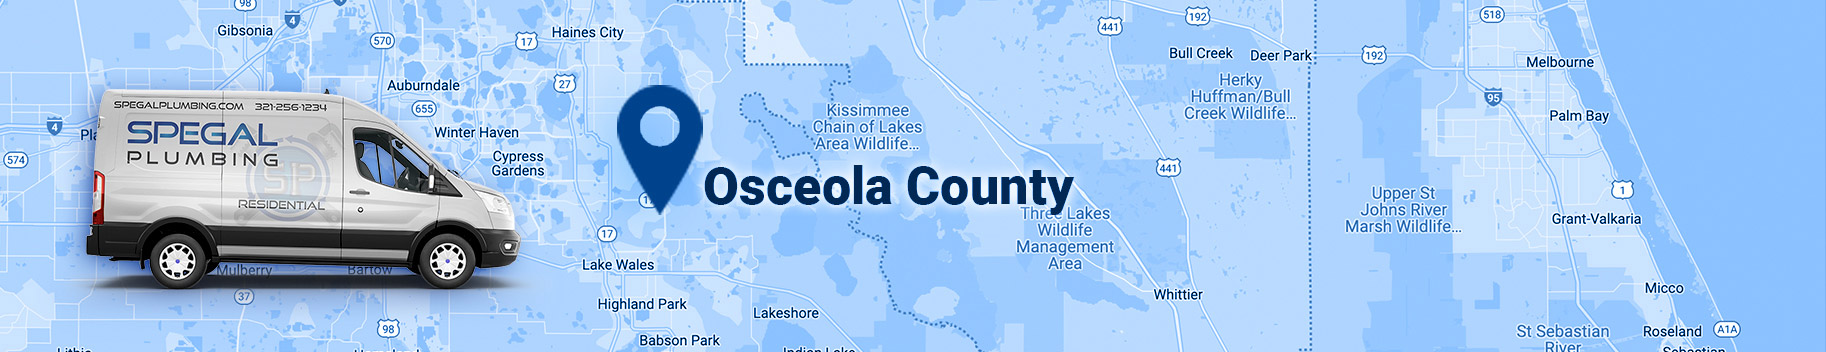 plumber st cloud, graphic depicting service car with the Speagle Plumbing logo on a map pinpointing Osceola County